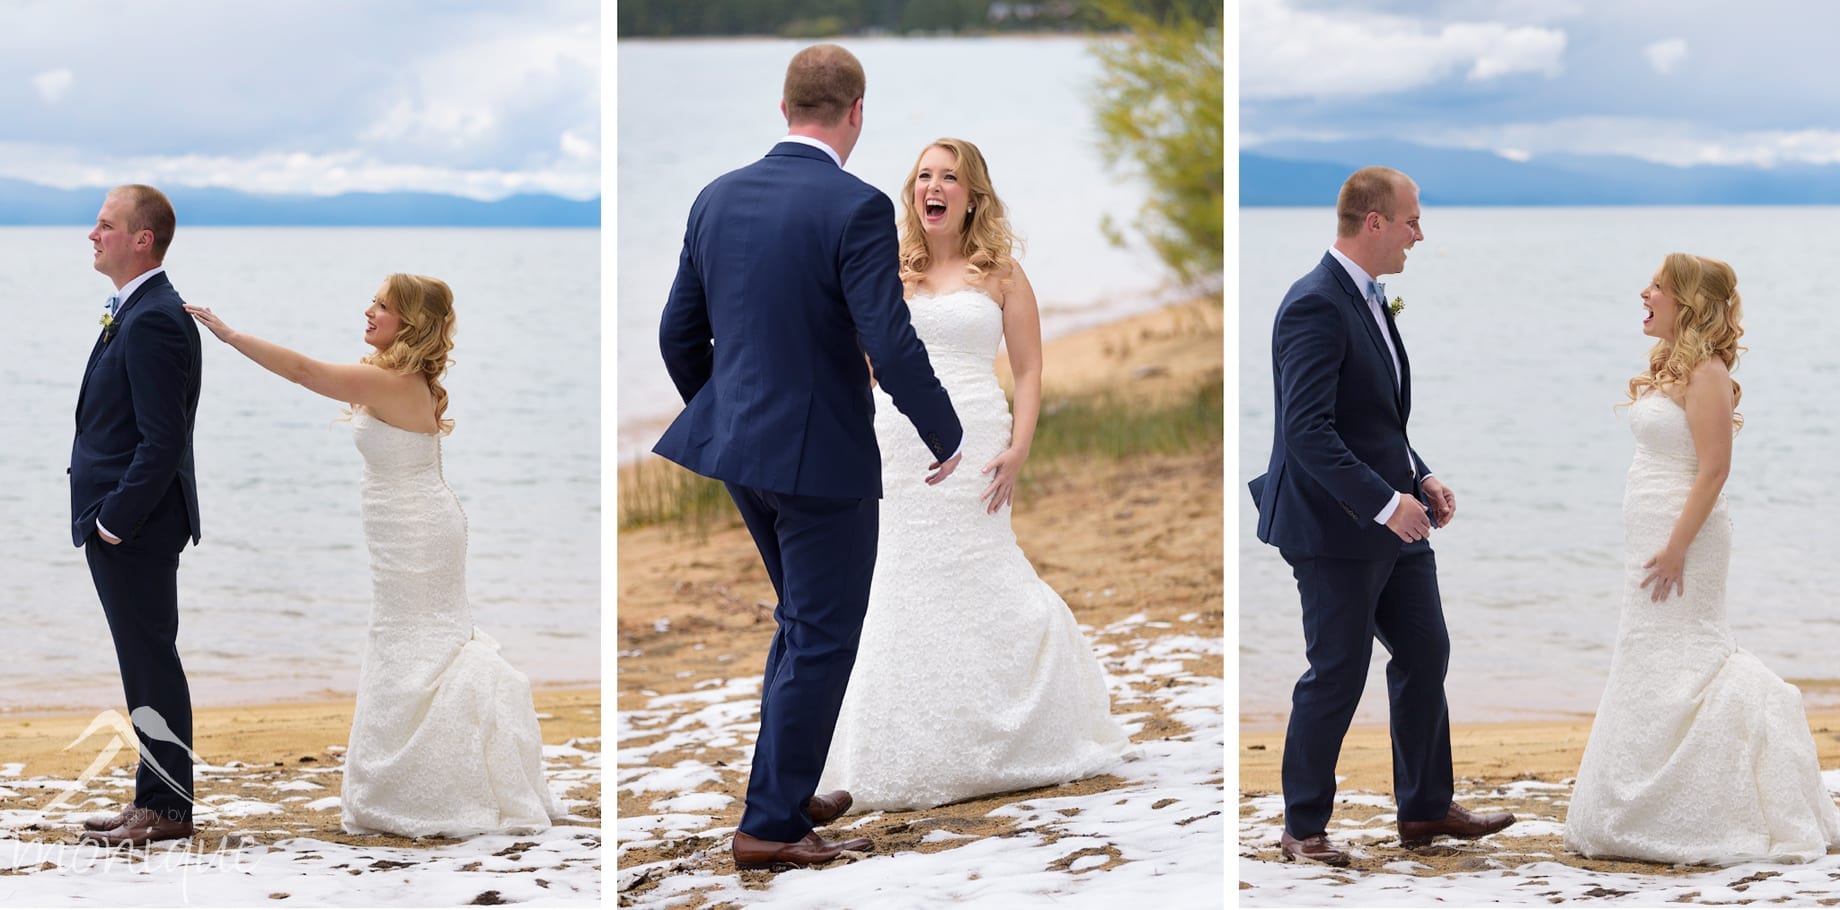 Lake Tahoe wedding photography sequence of the first look for an Edgewood bride and groom